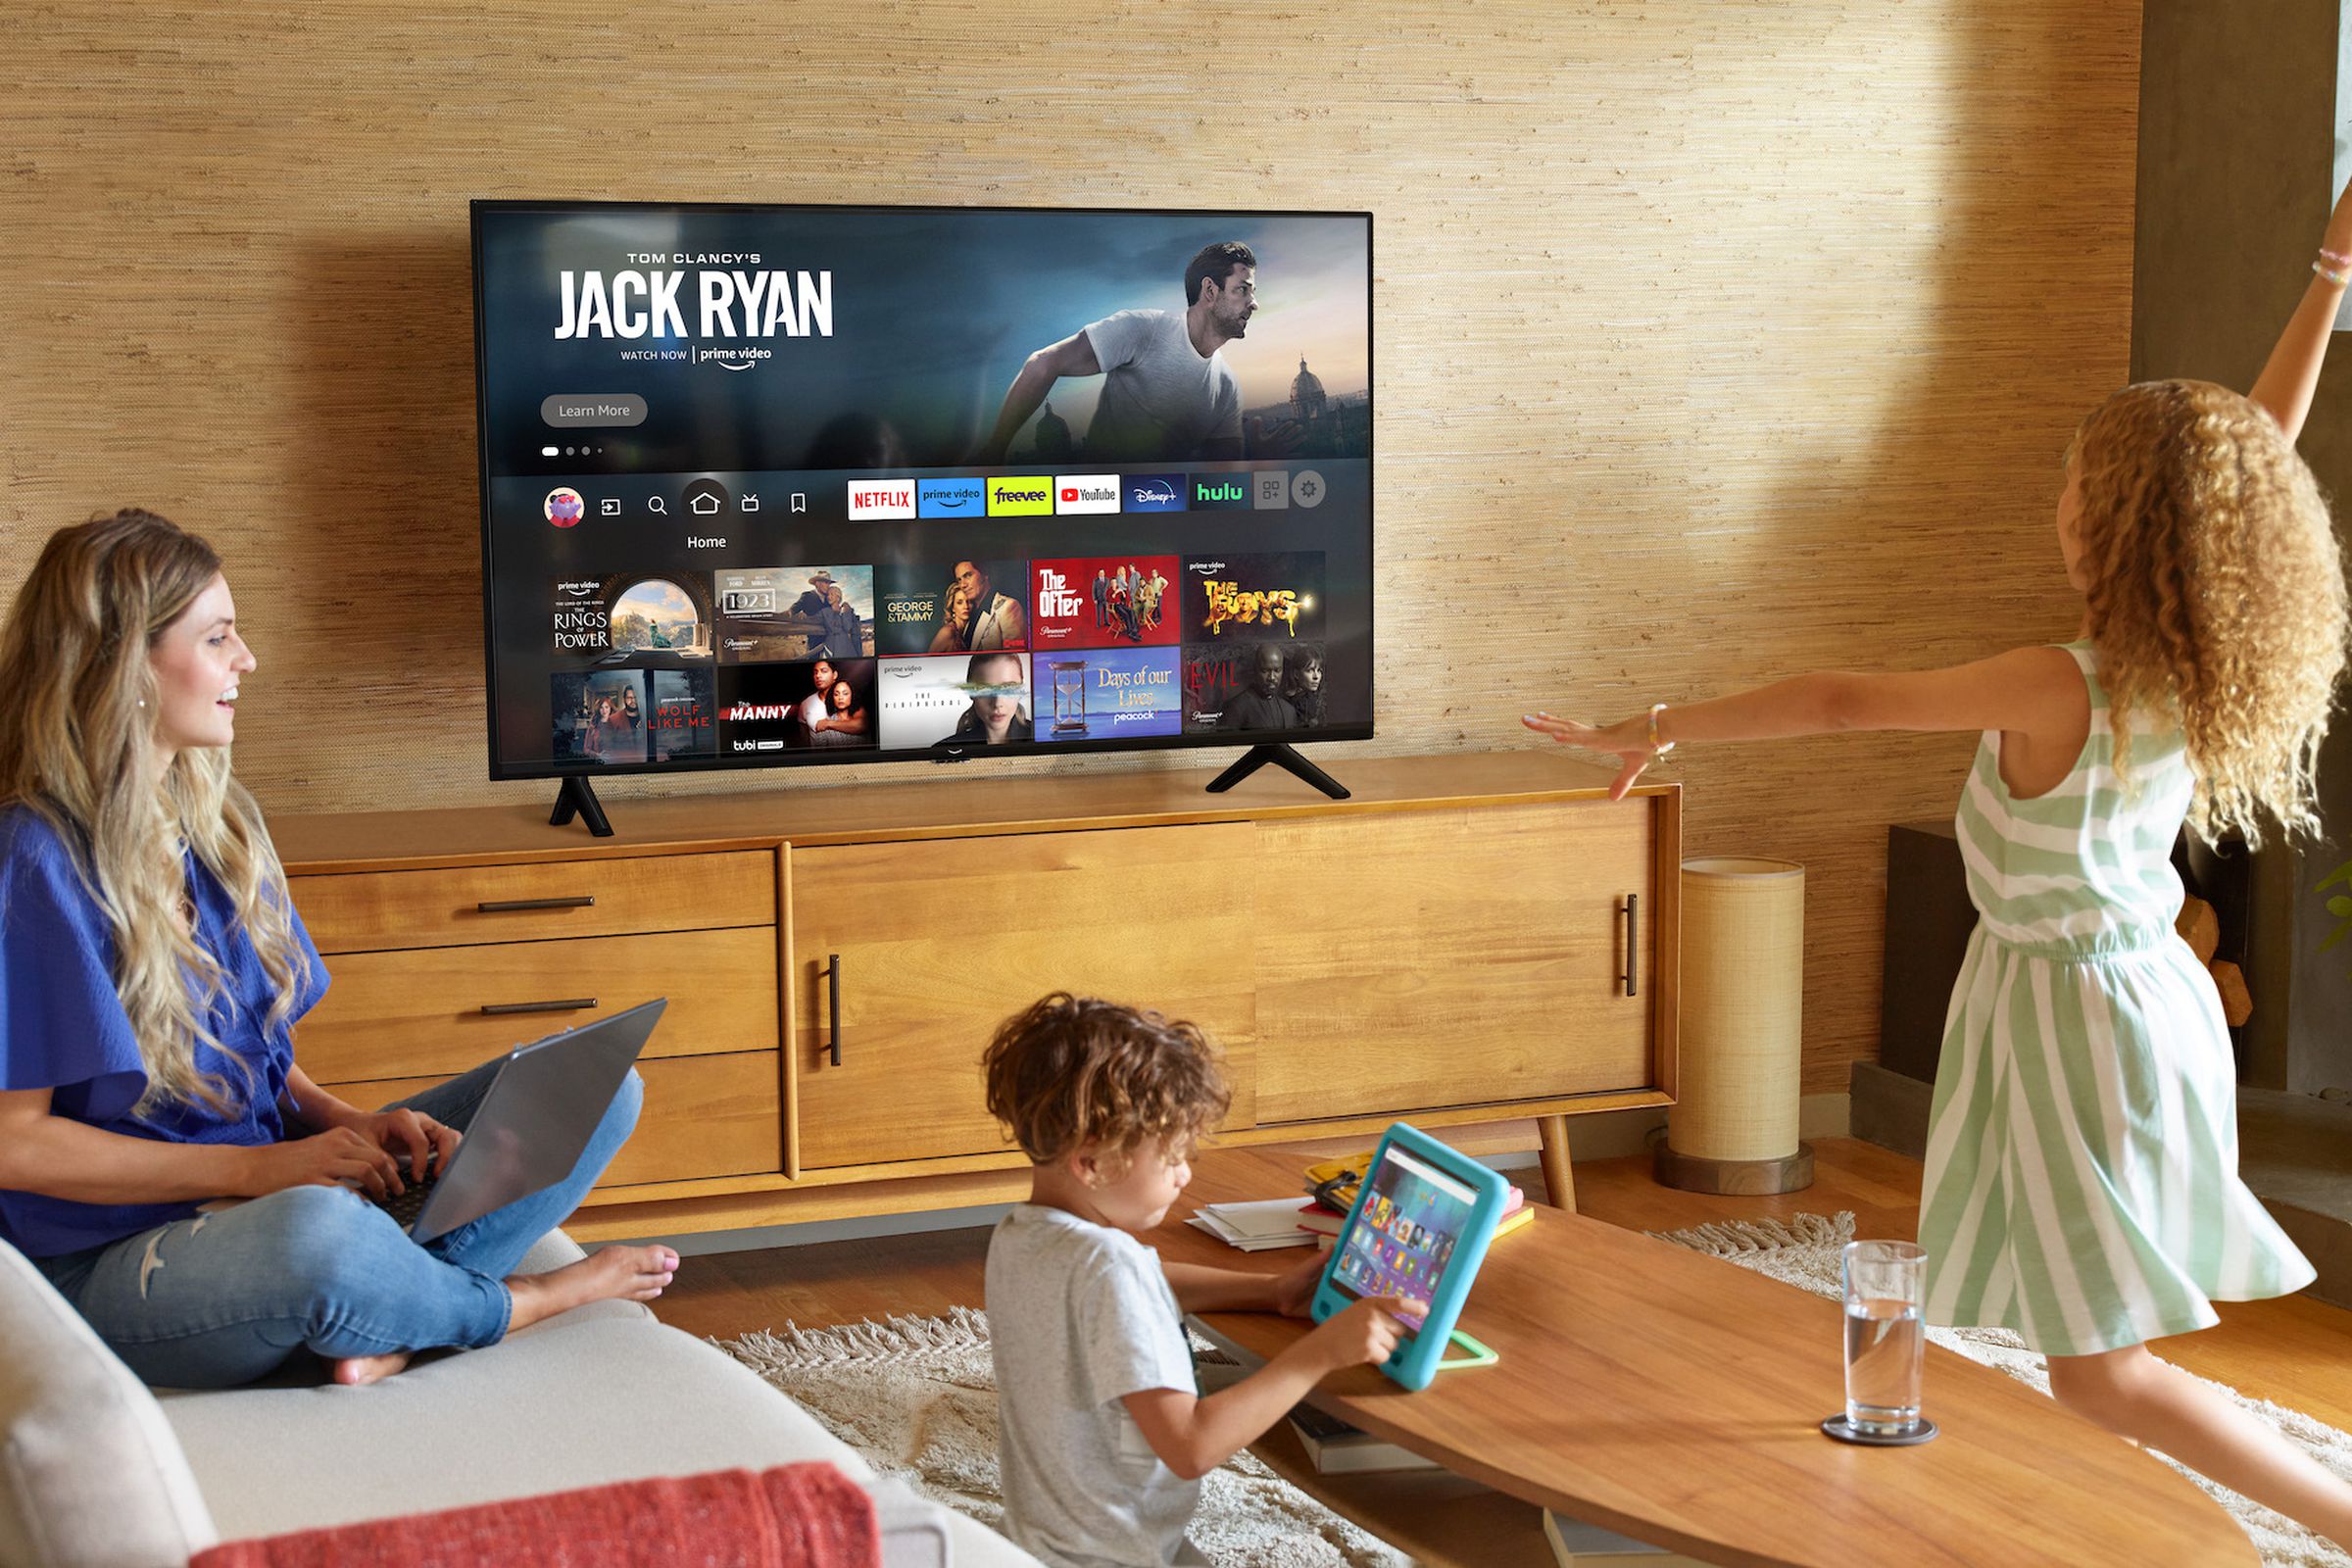 A marketing image of Amazon’s Fire TV 2-Series television.